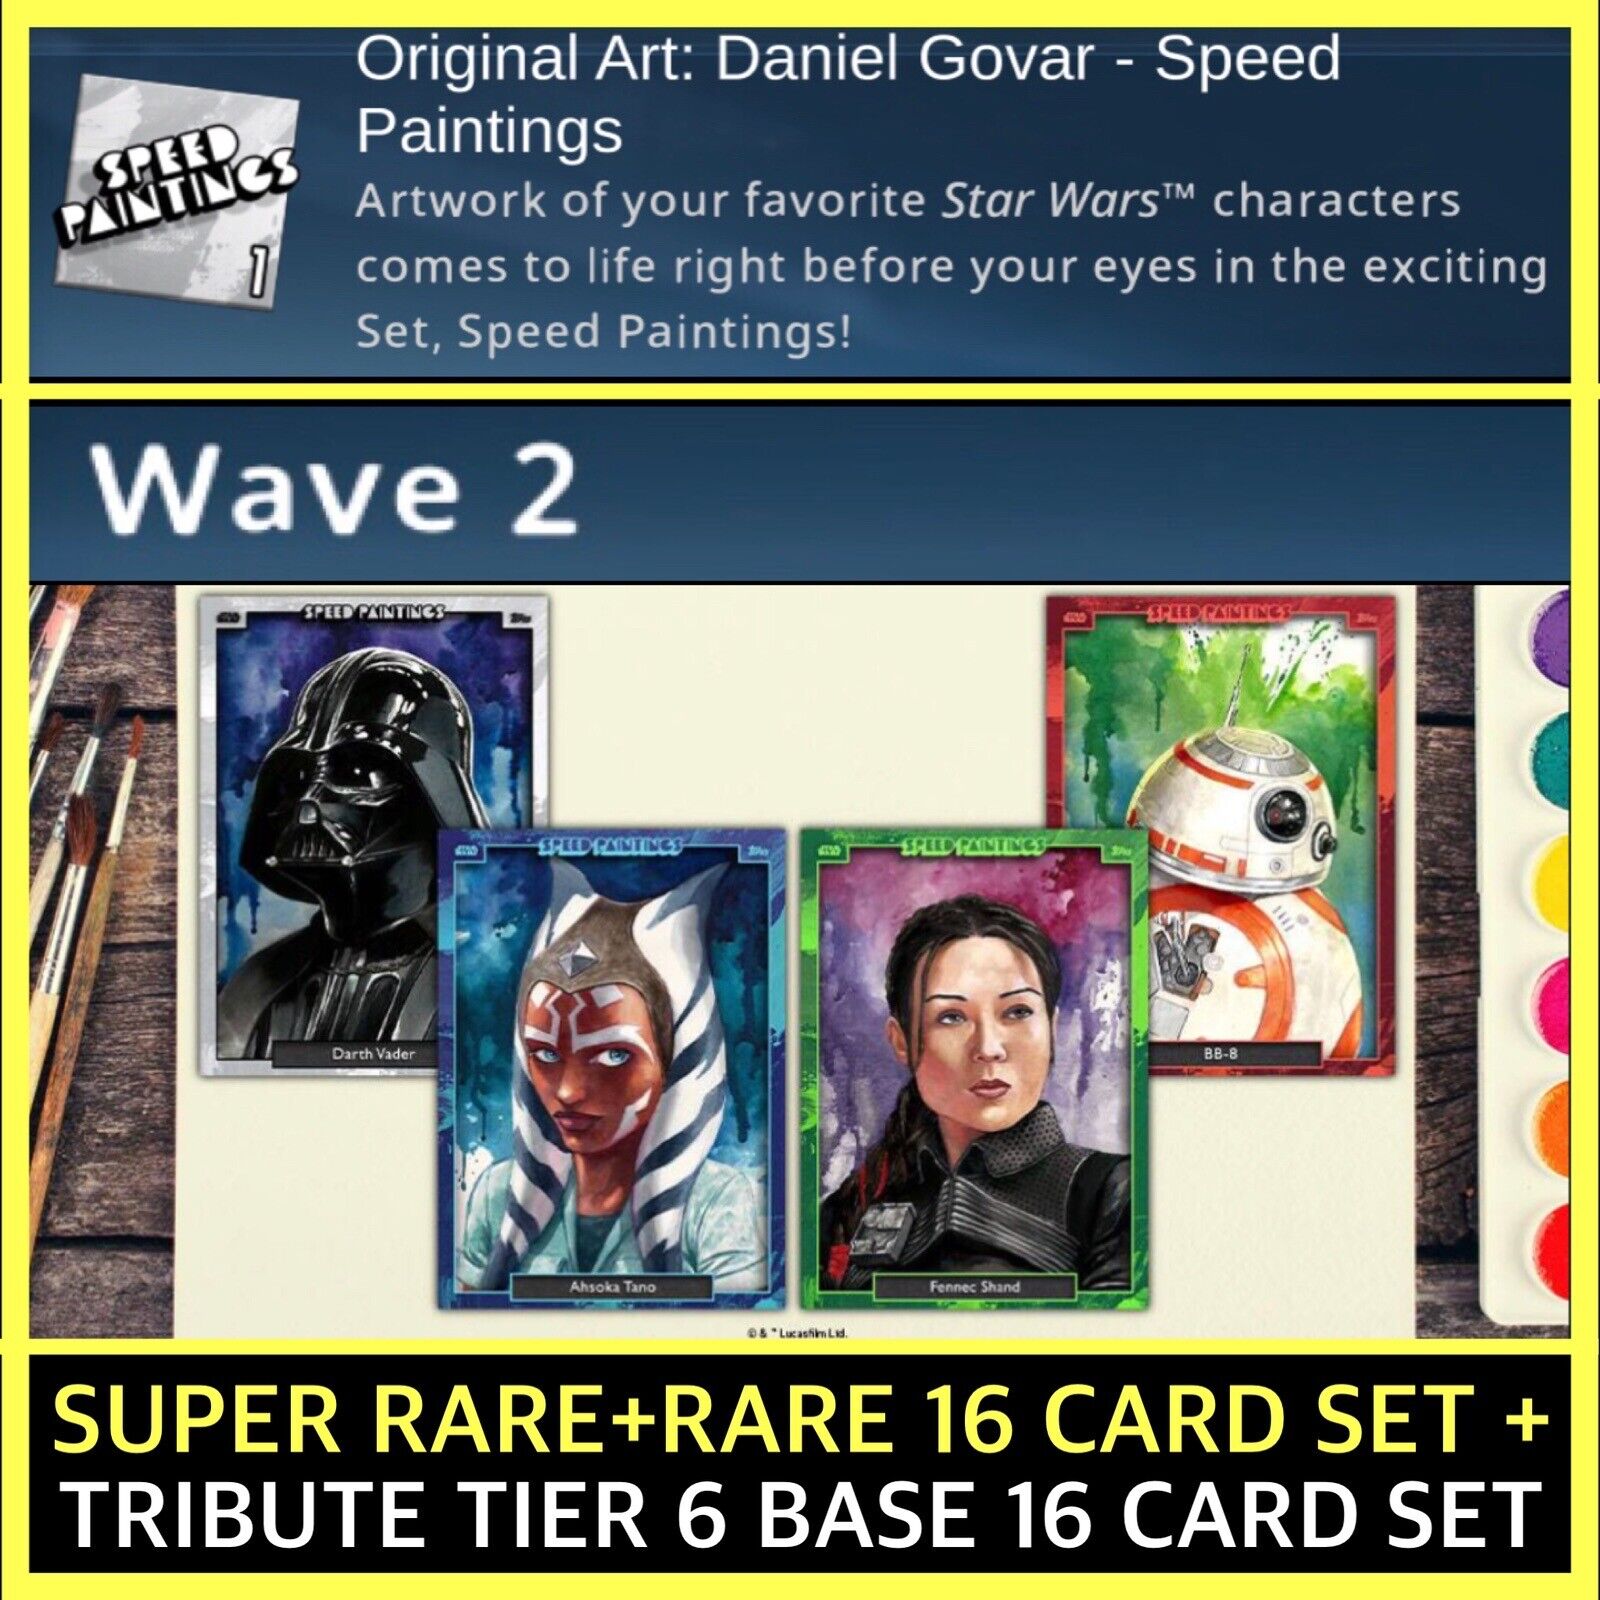 WAVE 2 SPEED PAINTINGS SR+RARE+TIER 6 TRIBUTE SET-TOPPS STAR WARS CARD TRADER